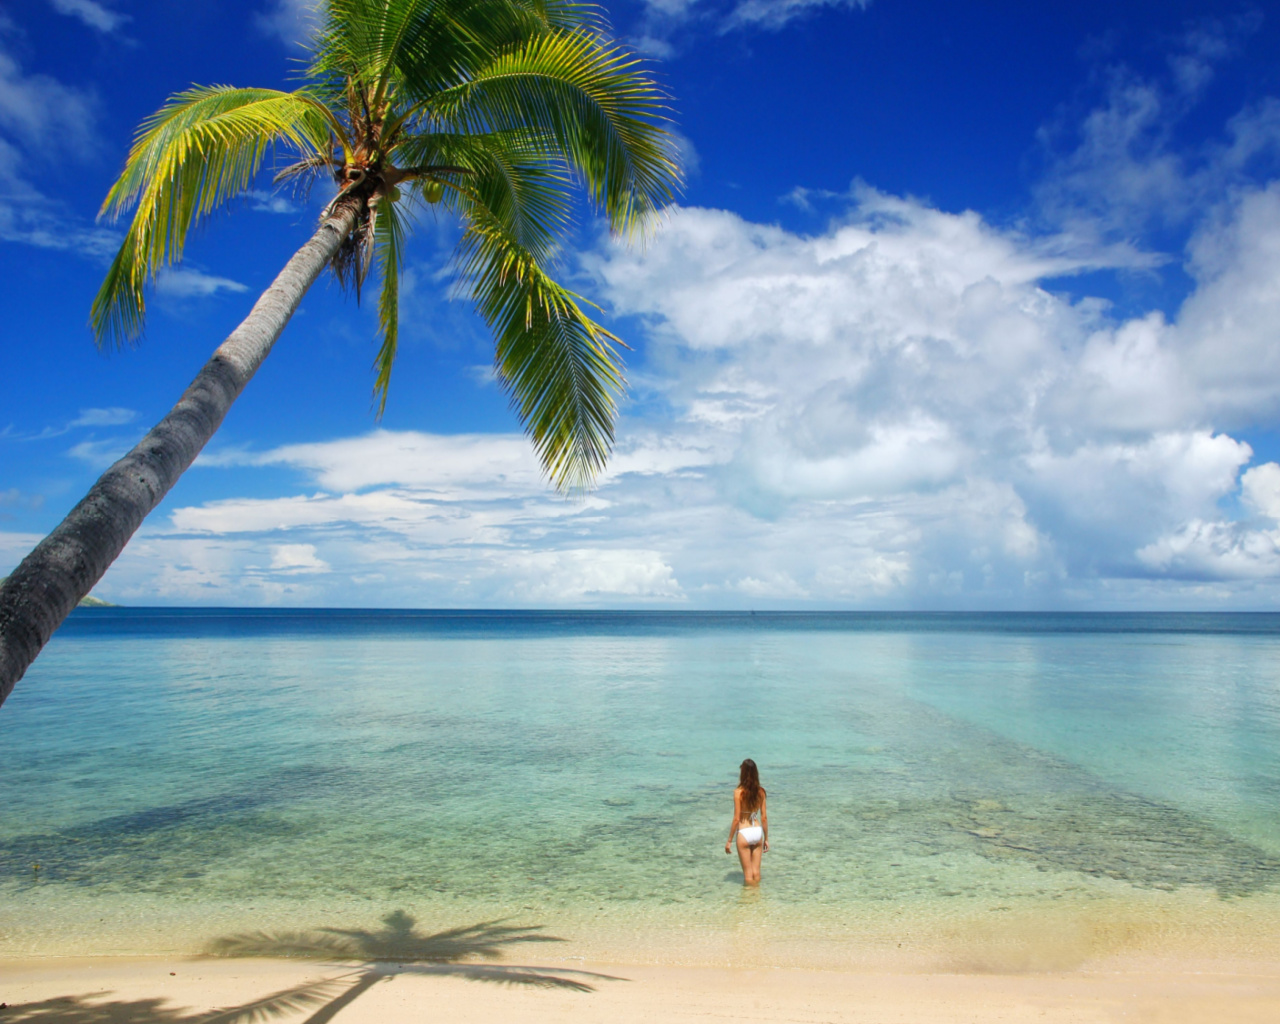 15 Important Things to Know About Fiji (Travel Tips & Advice)